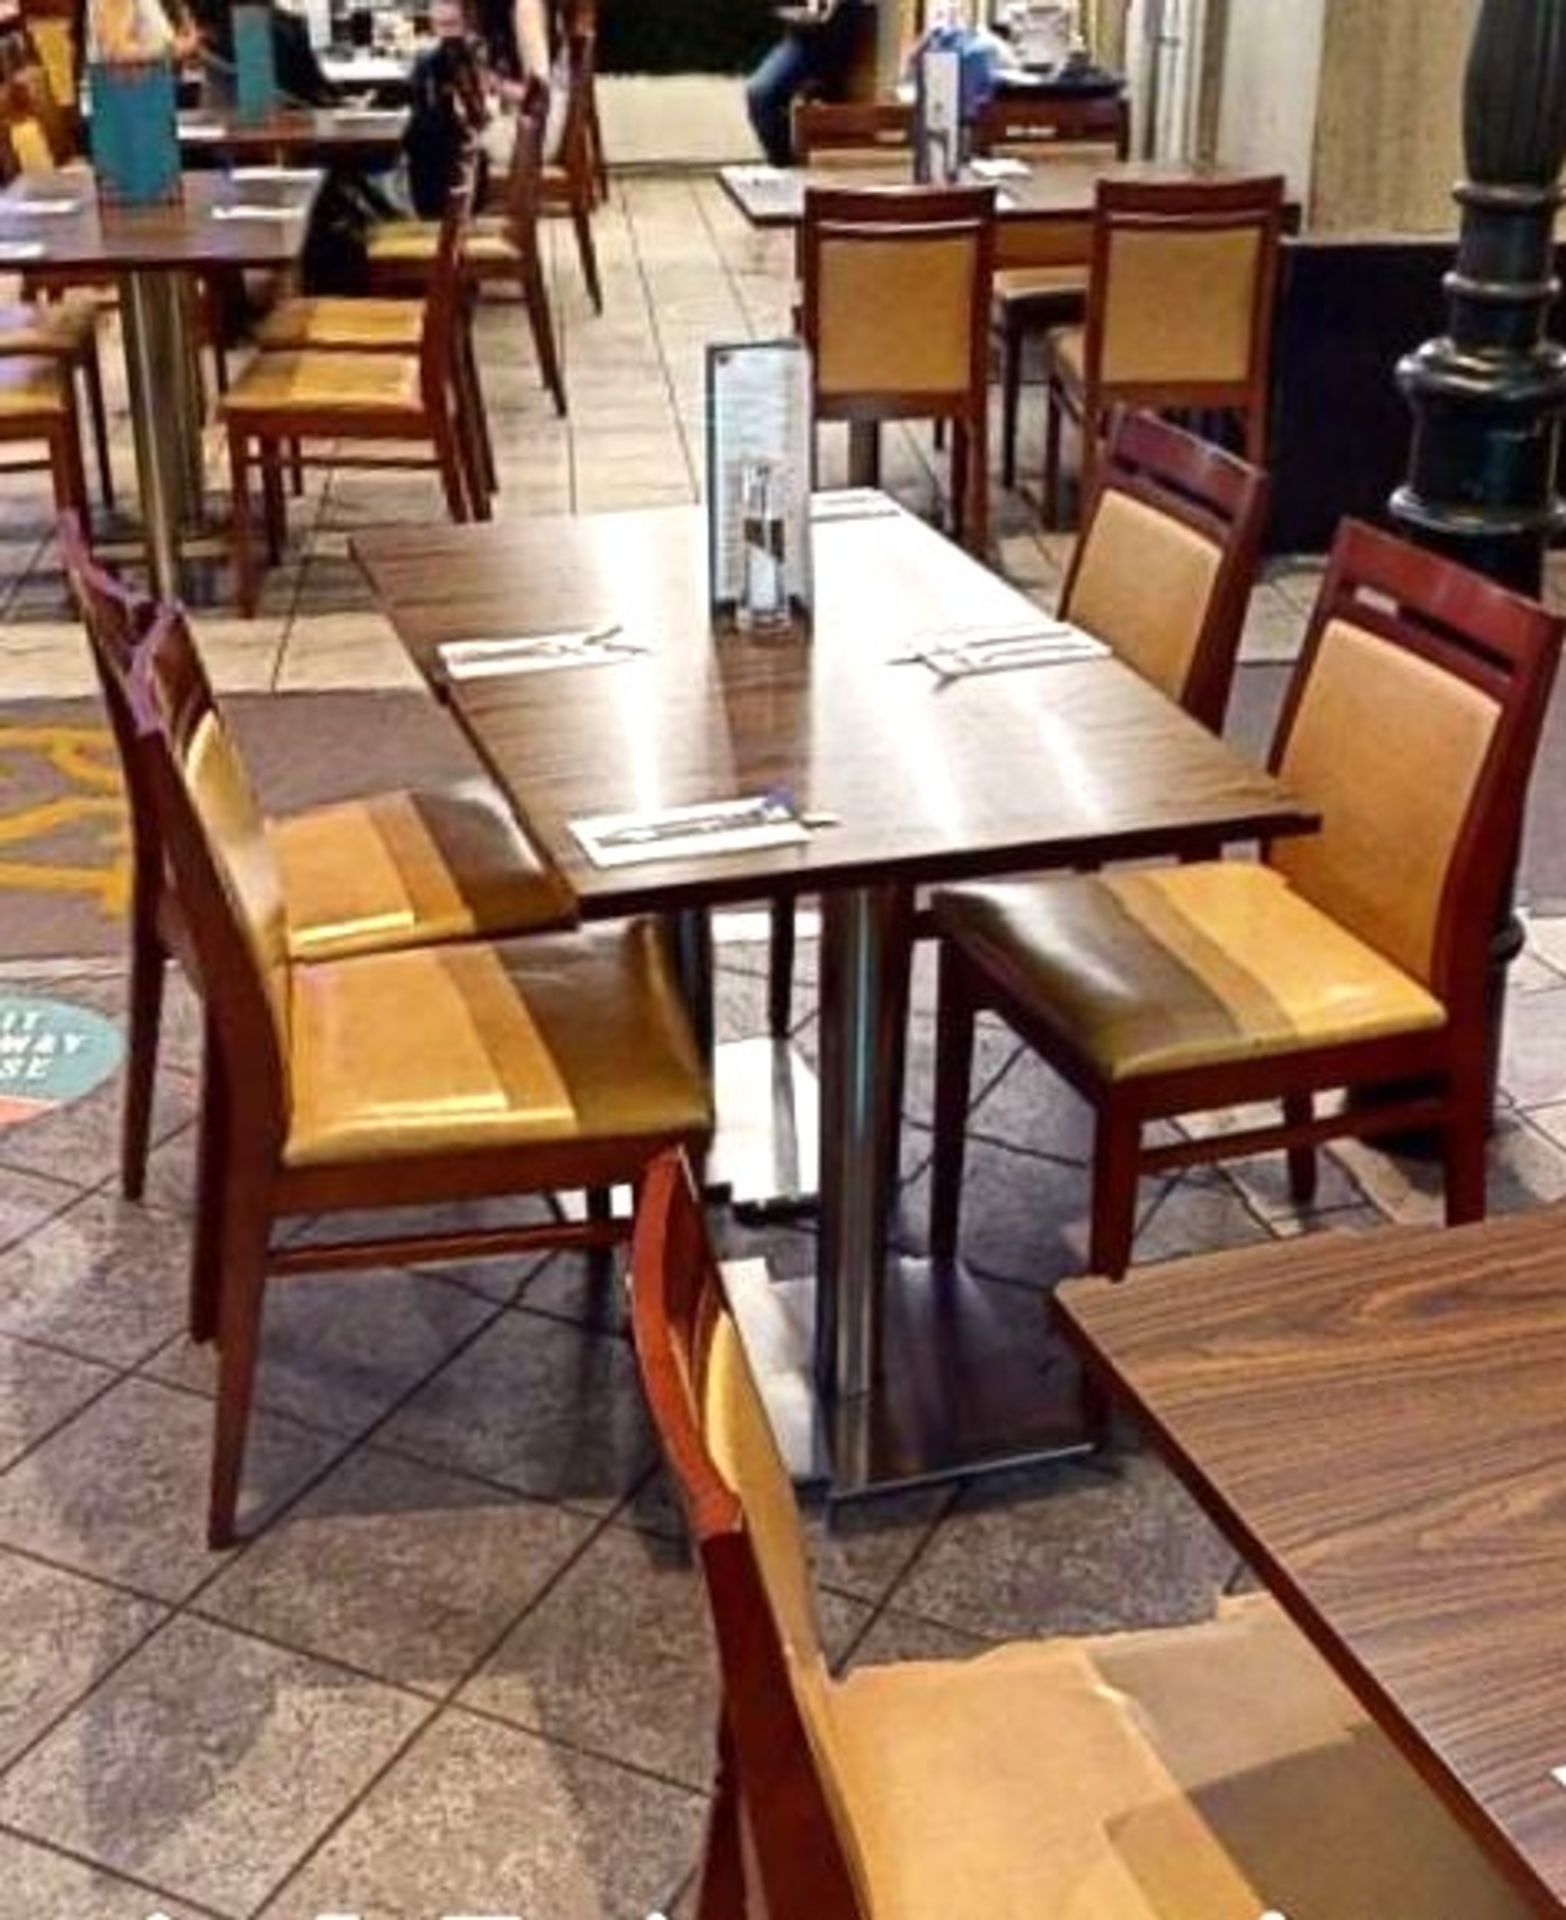 4 x Two Person Restaurant Dining Tables Featuring Chrome Pedestals and Tops With a Walnut Finish - Image 4 of 4